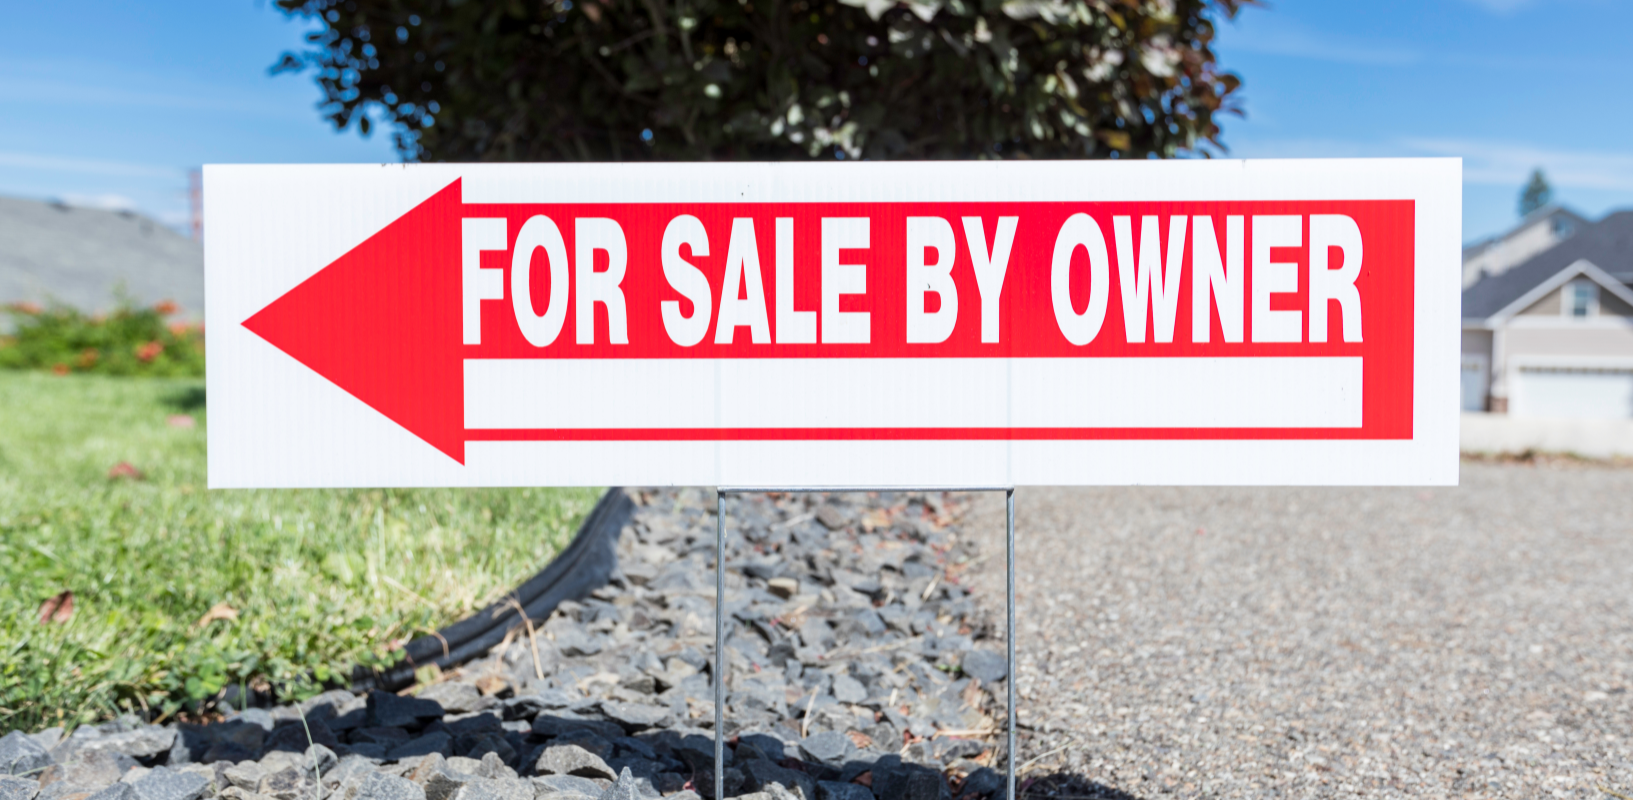 For Sale By Owner sign in front of a house in Cincinnati, illustrating the process of selling a home without an agent to save on commissions and have more control over the sale.